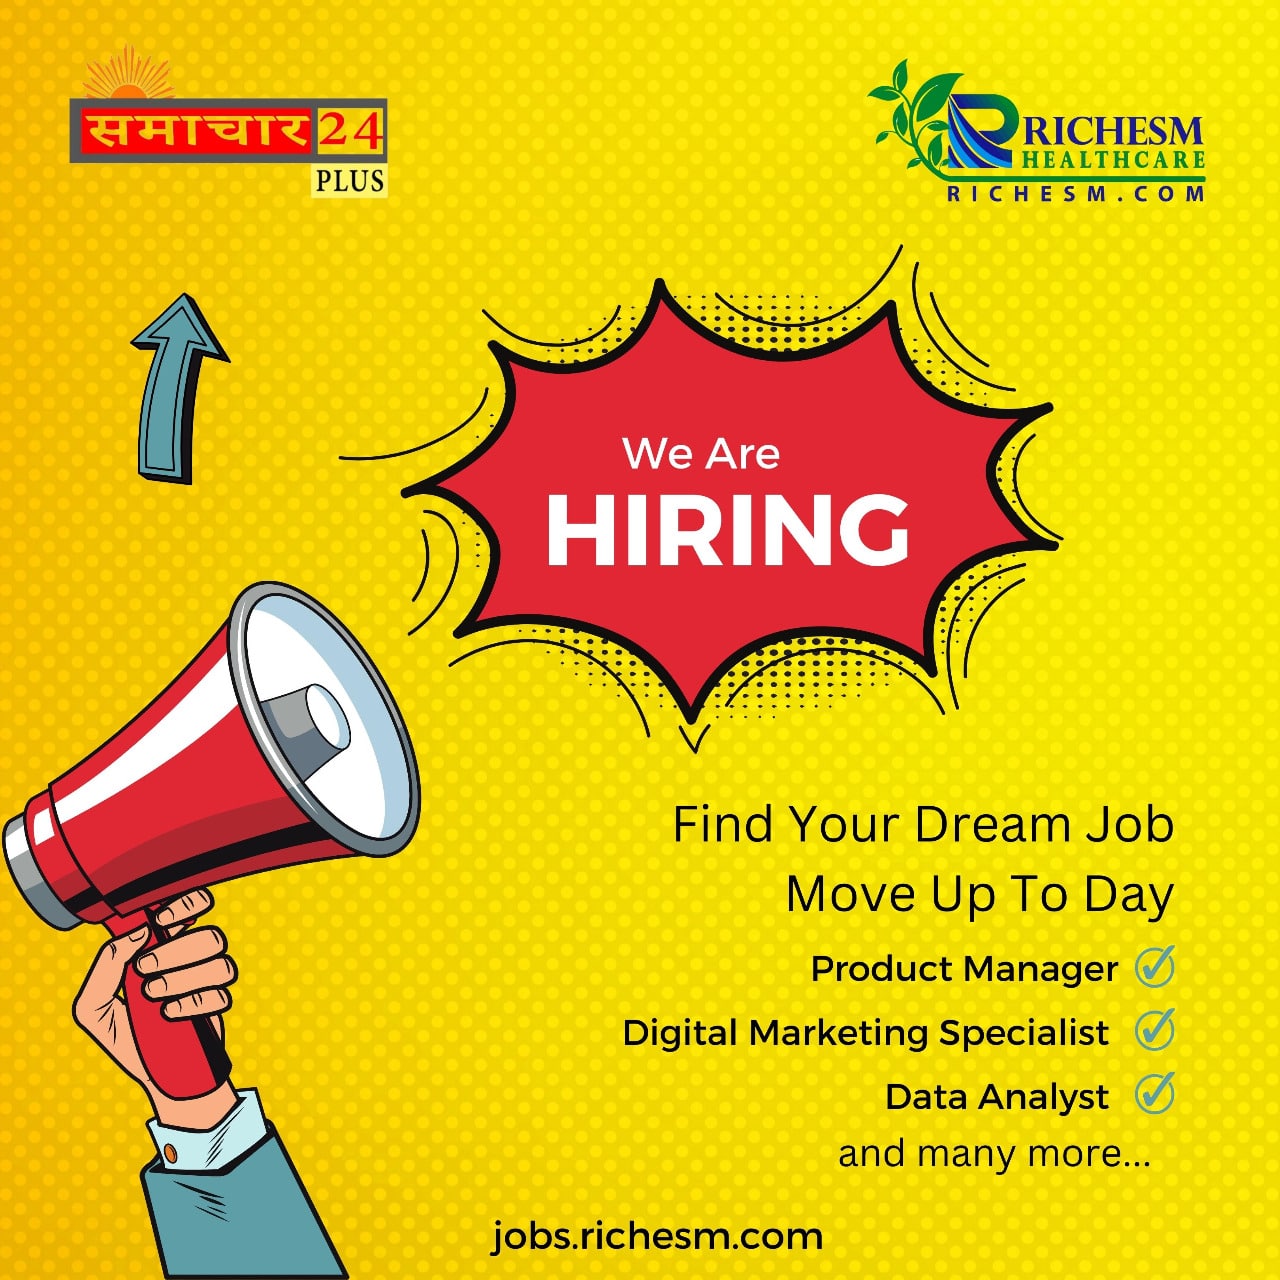 Find Your Dream Job Today With RichesM